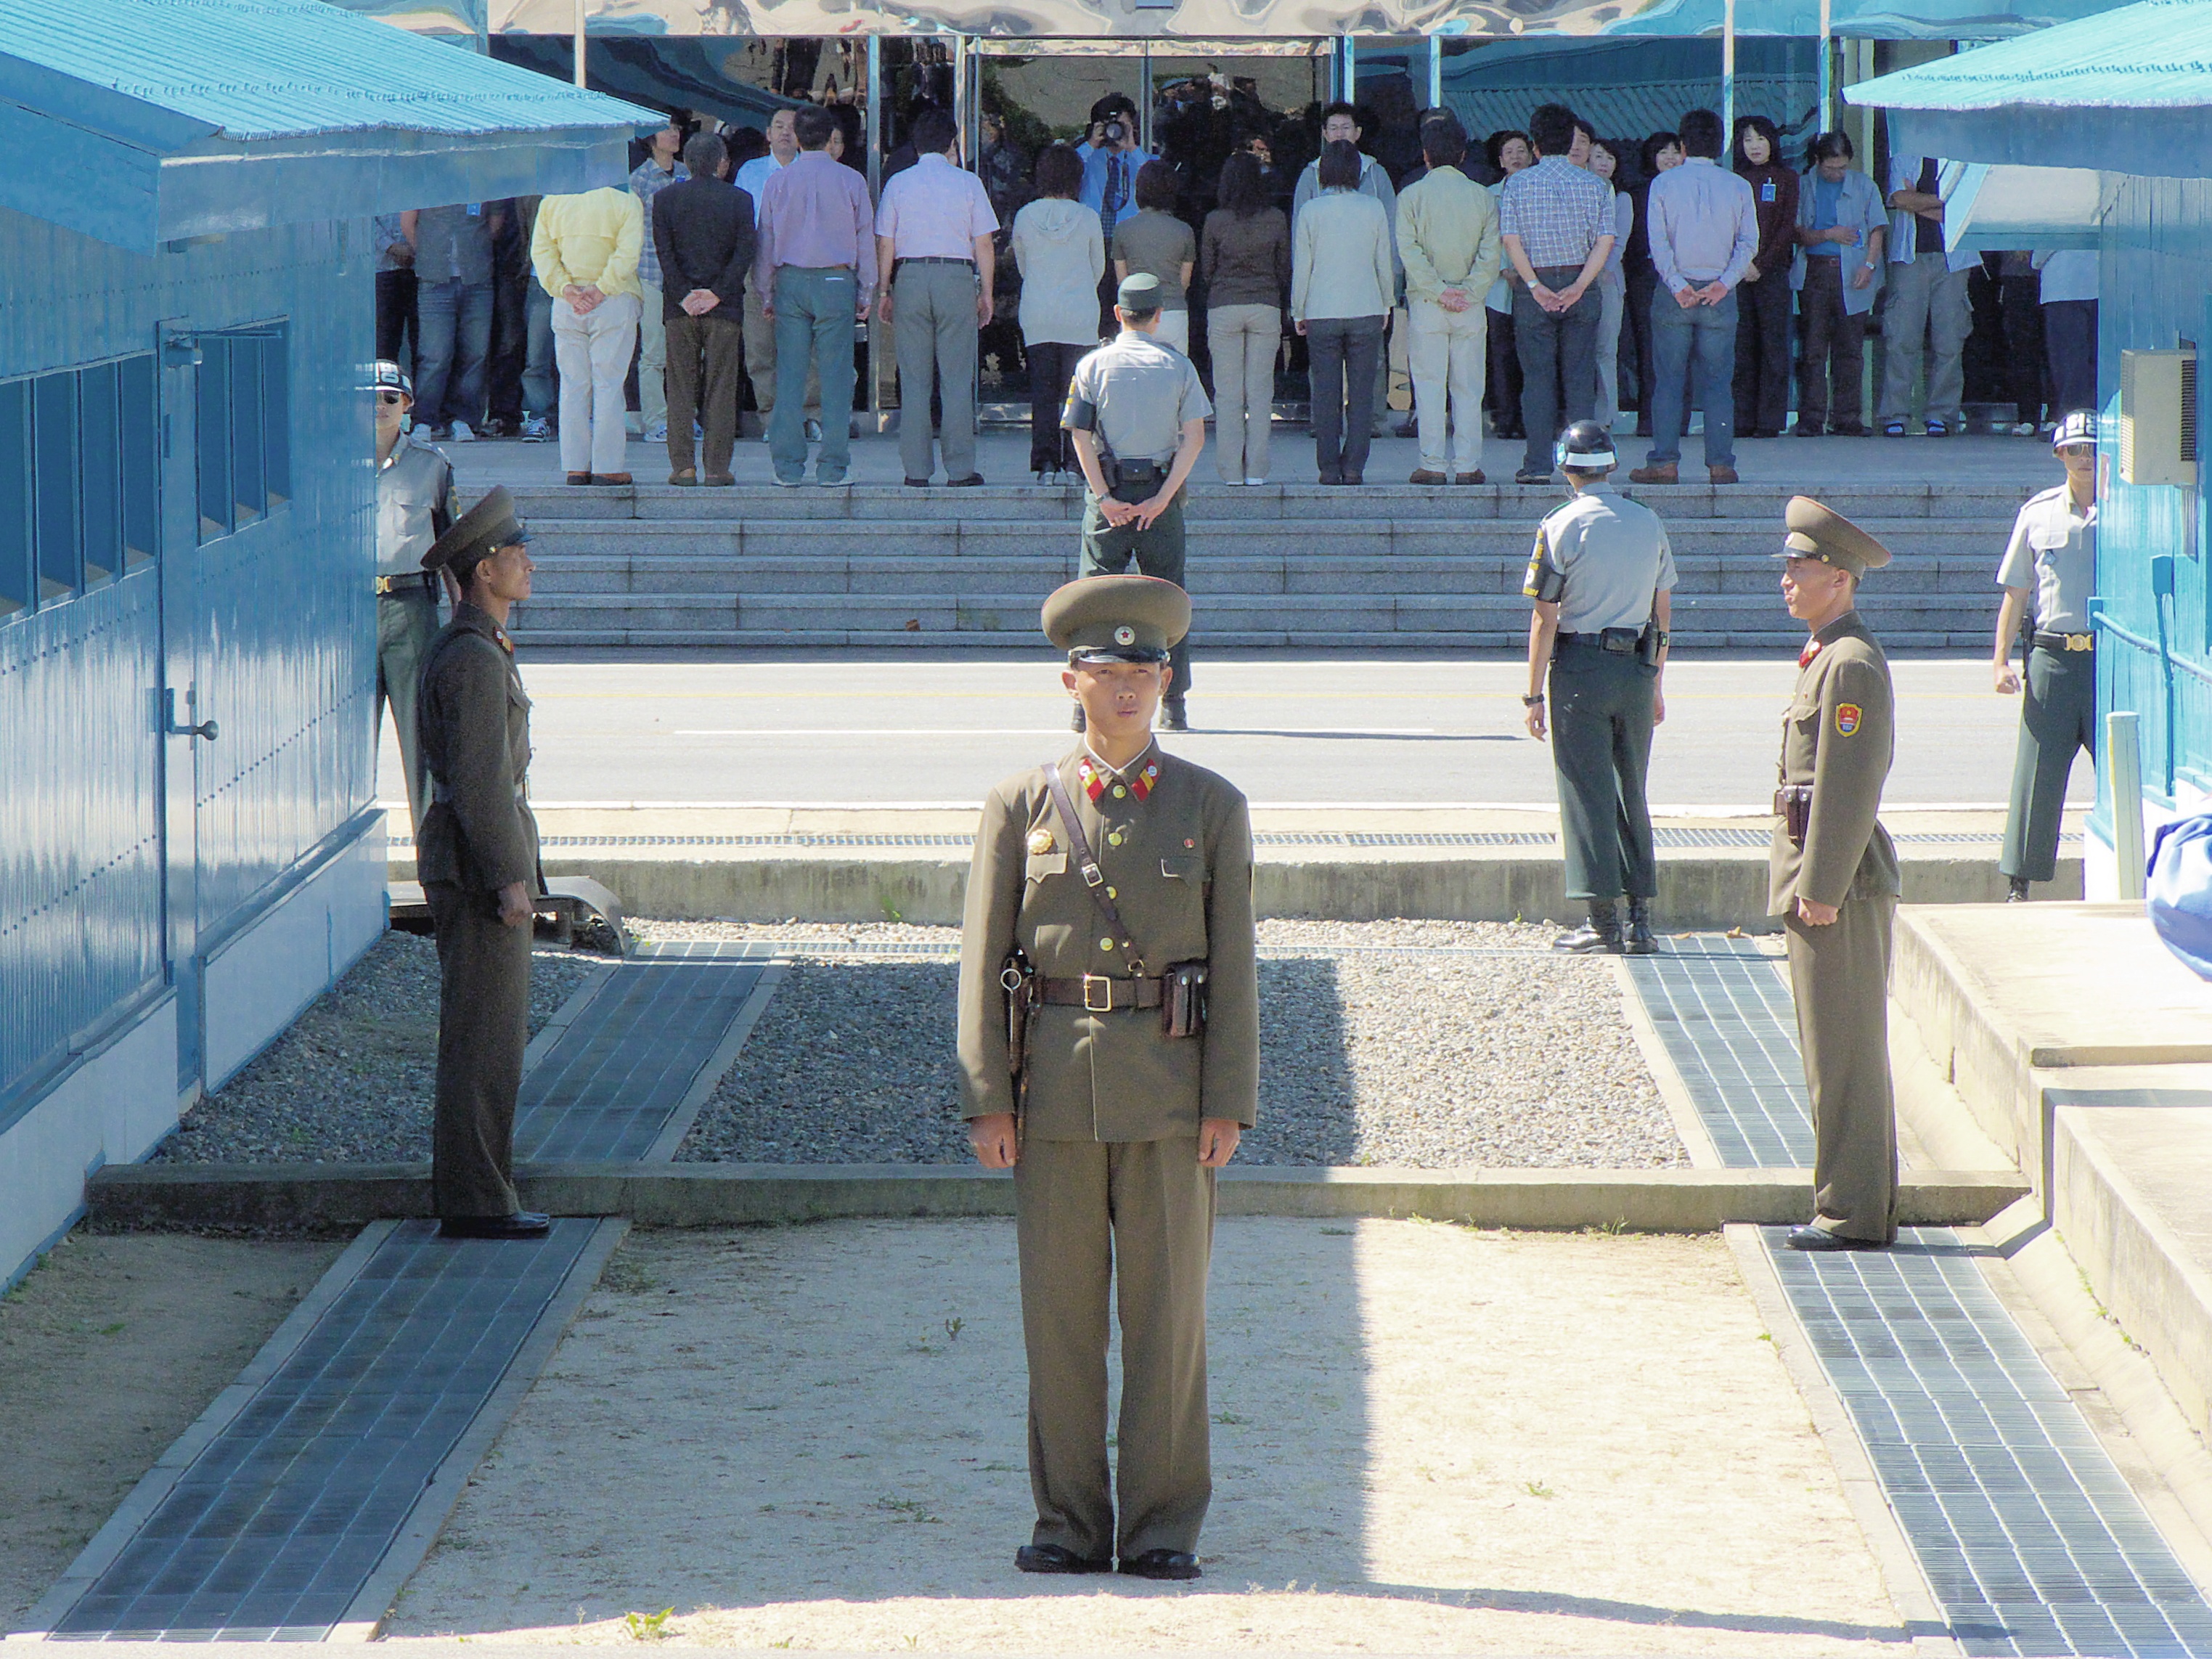 File:Joint Security Area.jpg - Wikimedia Commons